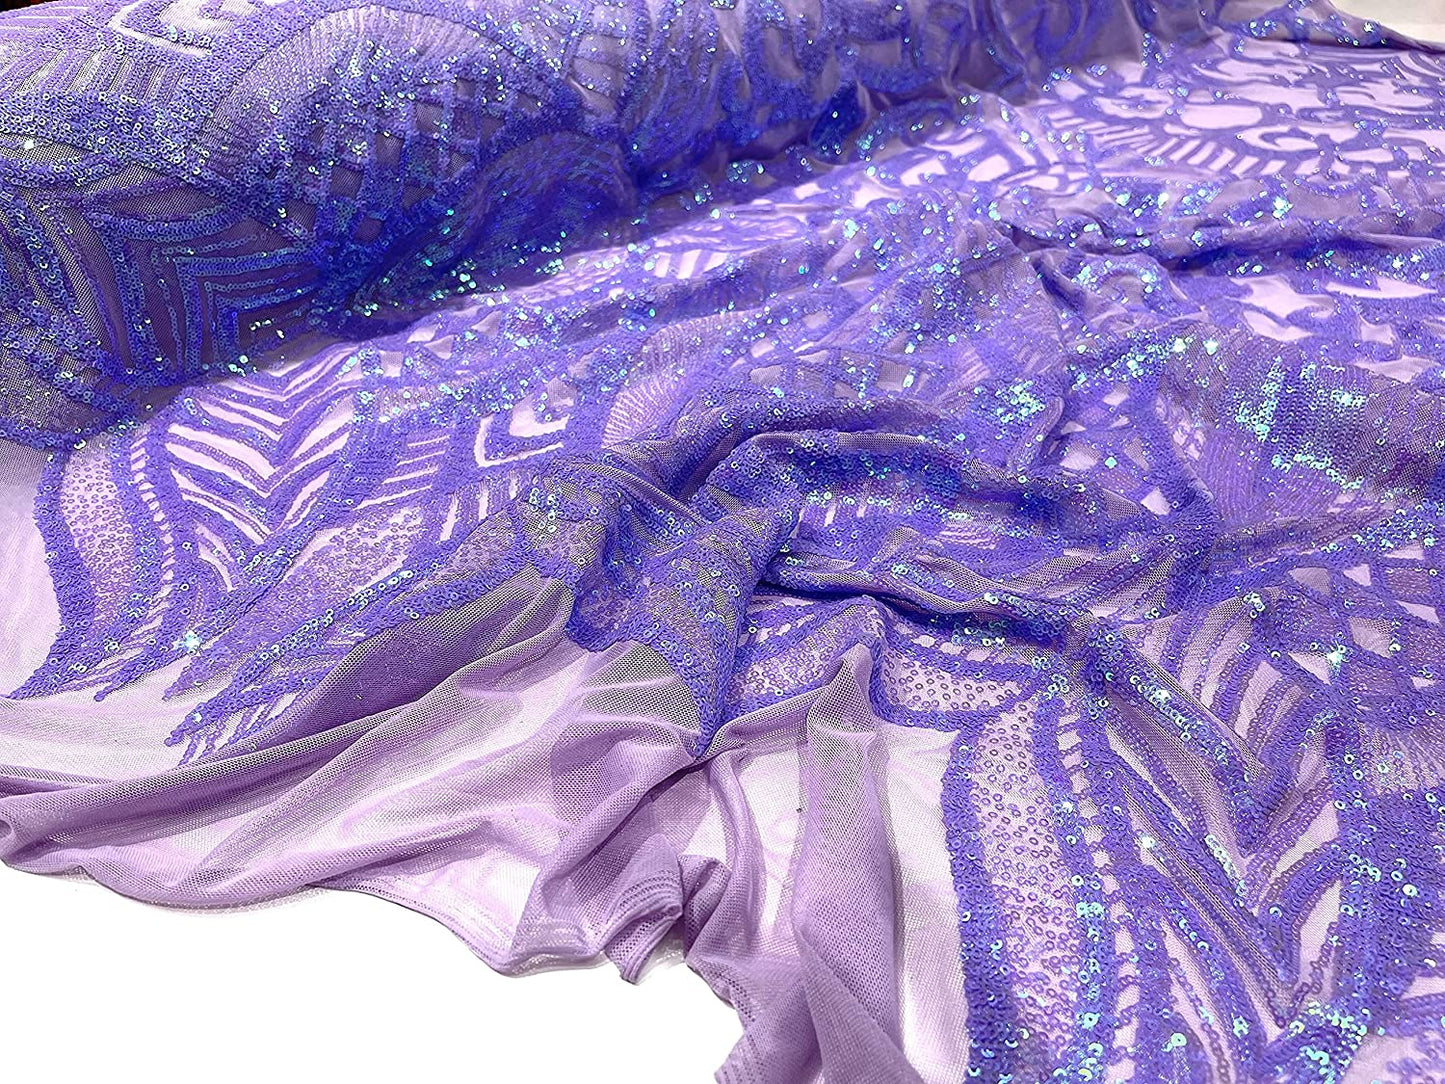 Iridescent Royalty Design On A 4 Way Stretch Mesh/Prom Fabric (1 Yard, Lavender Iridescent on Lilac Mesh)